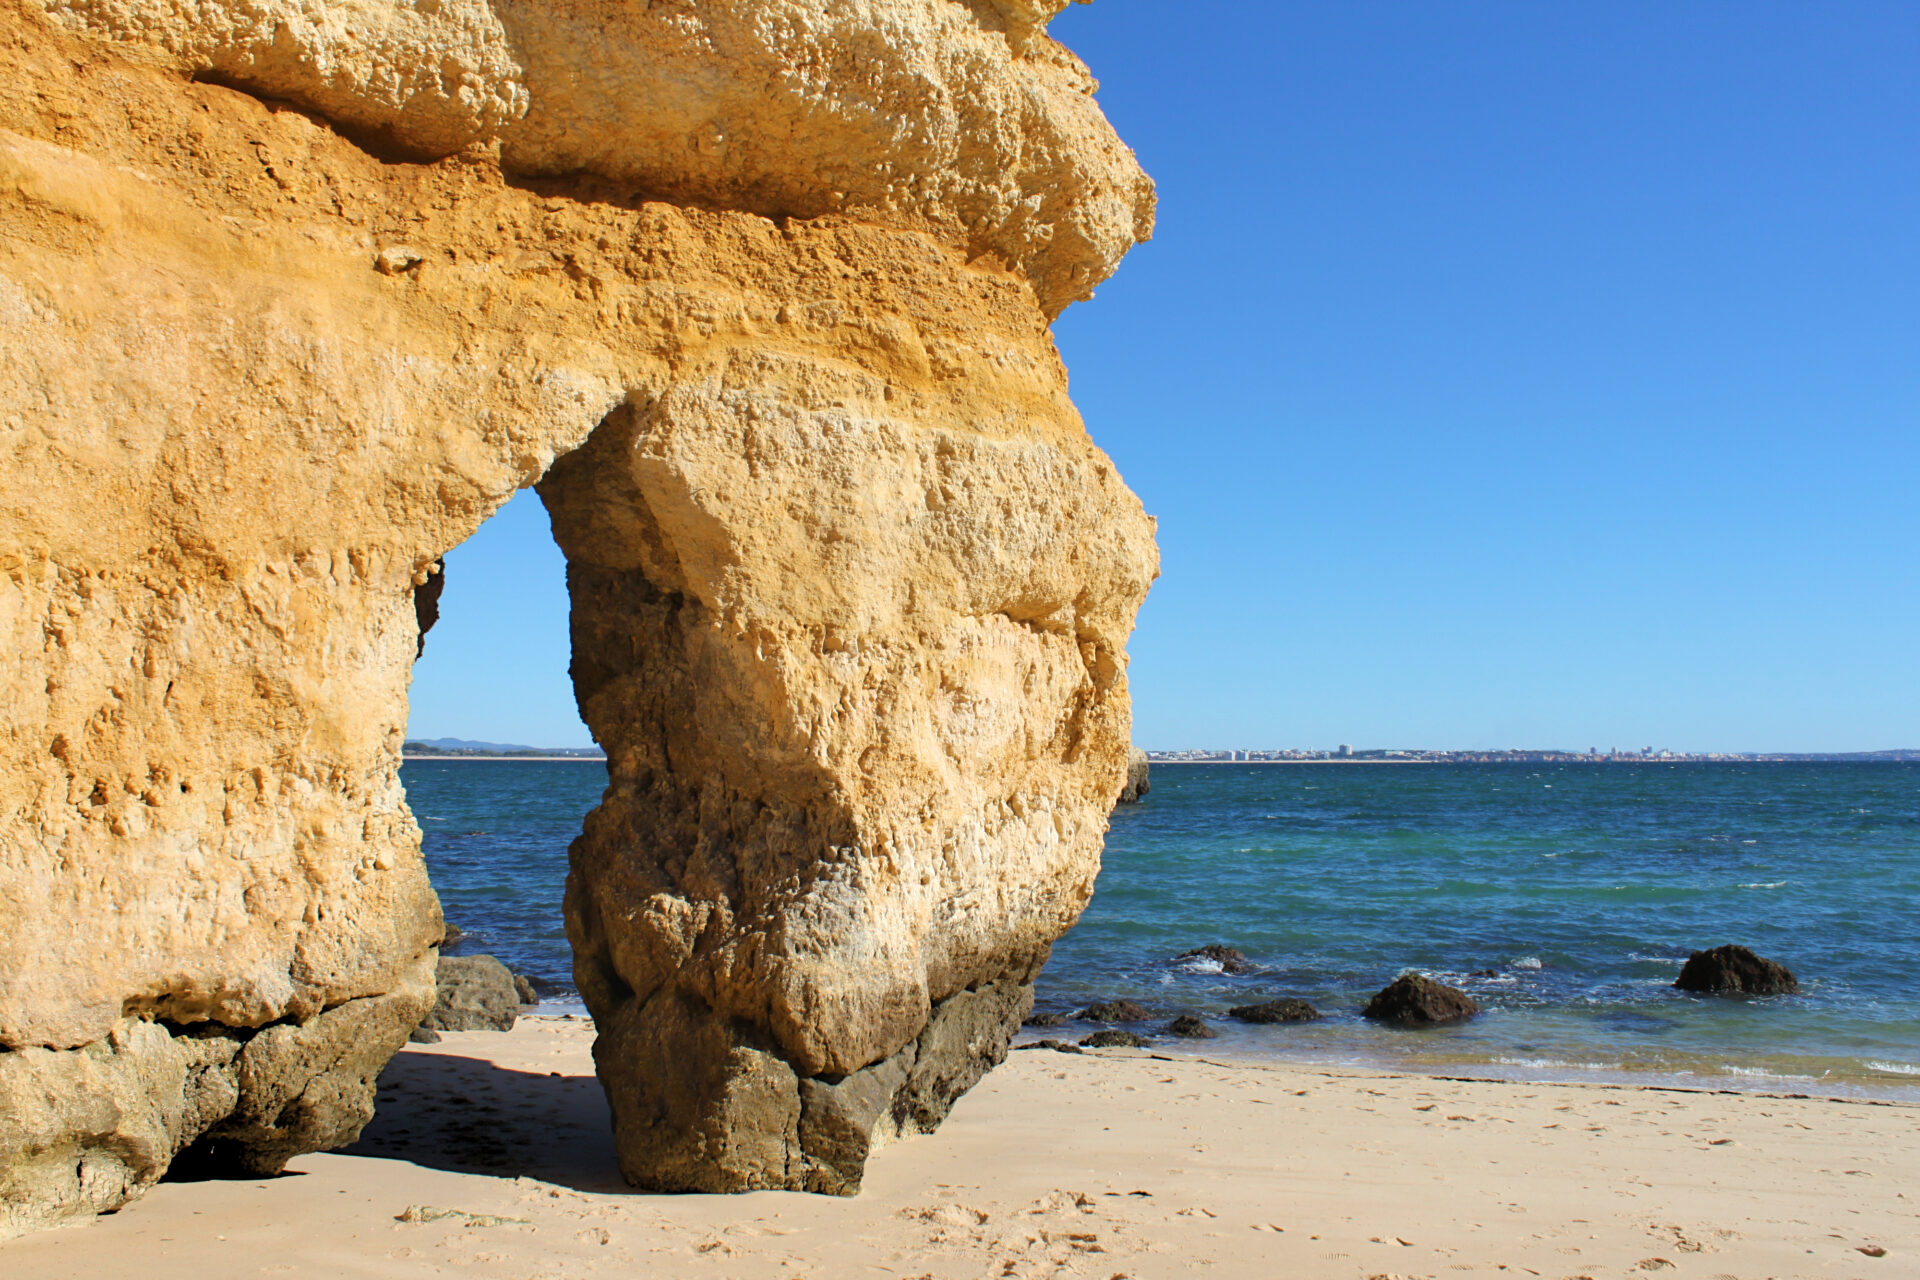 Visiting Lagos Portugal on the coast